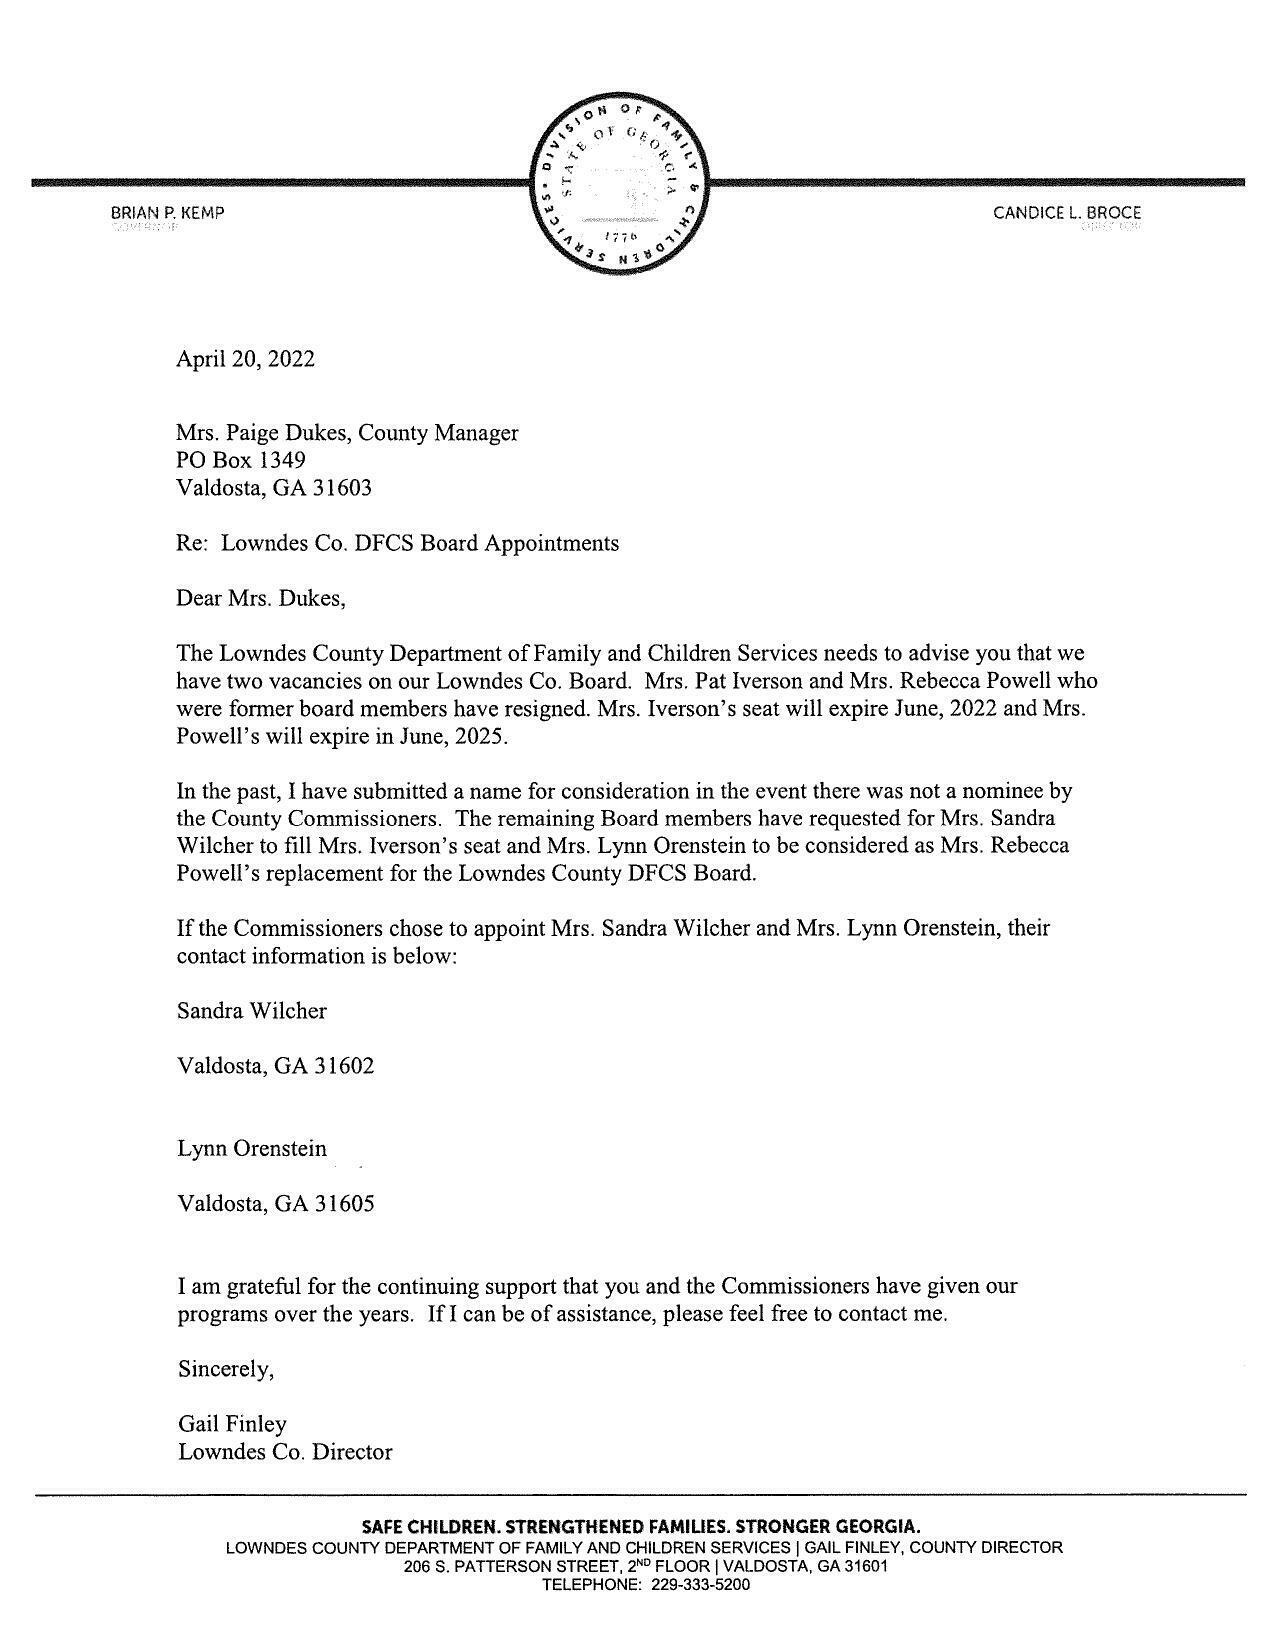 Request letter from DFCS